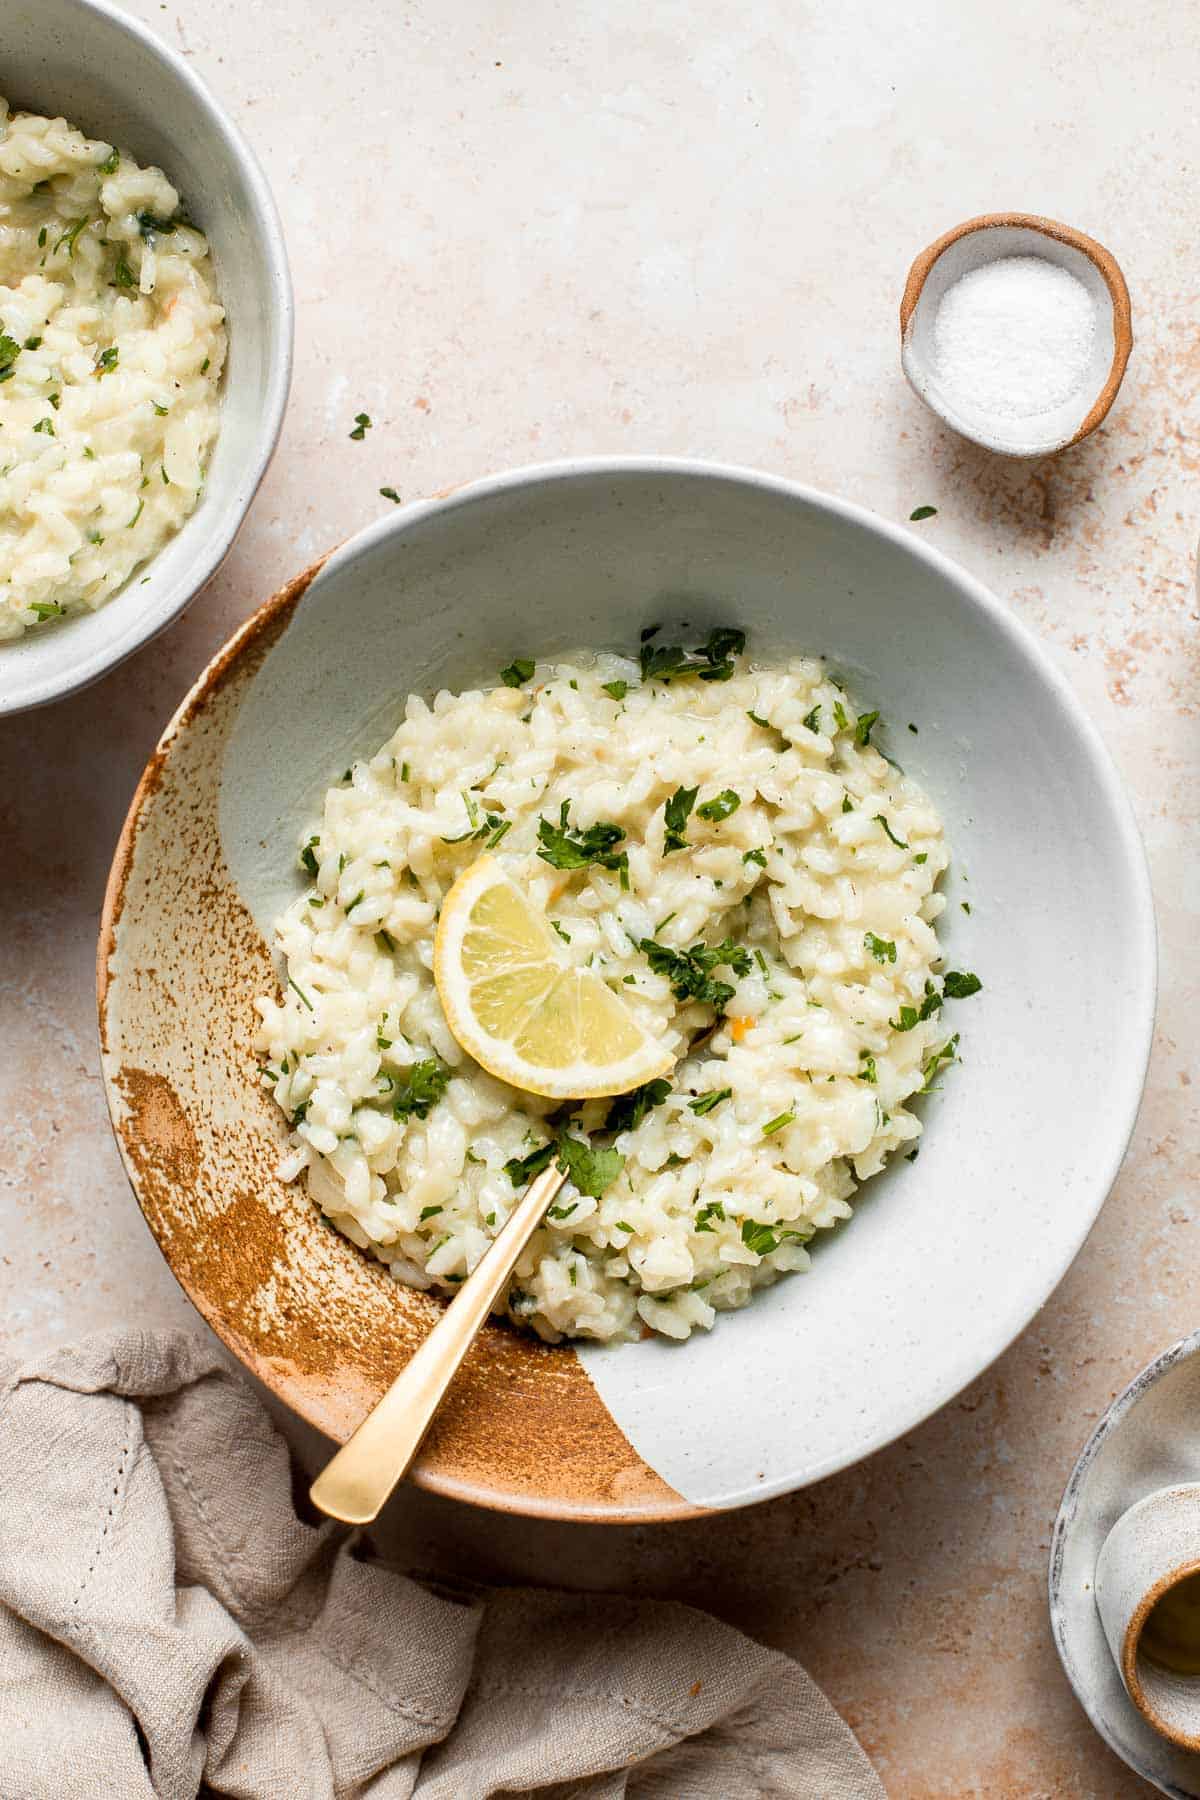 Creamy Parmesan (No Wine) Risotto is a rich, creamy, and comforting classic Italian dish that may be intimidating but is actually quick and easy to make. | aheadofthyme.com